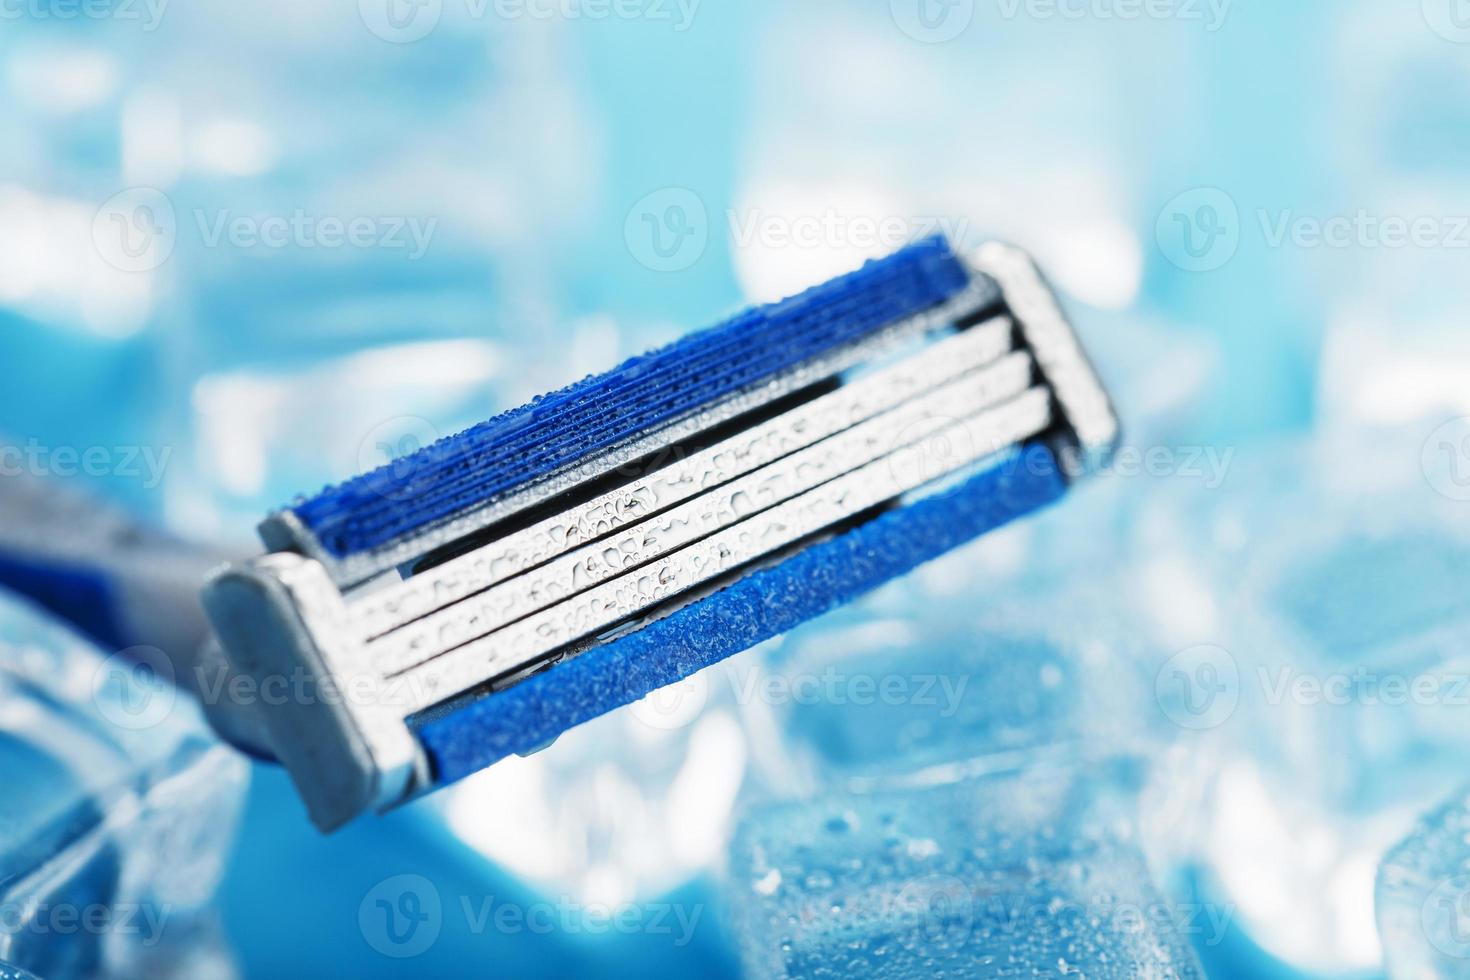 Blue shaving machine with sharp blades on the background of ice cubes close-up photo